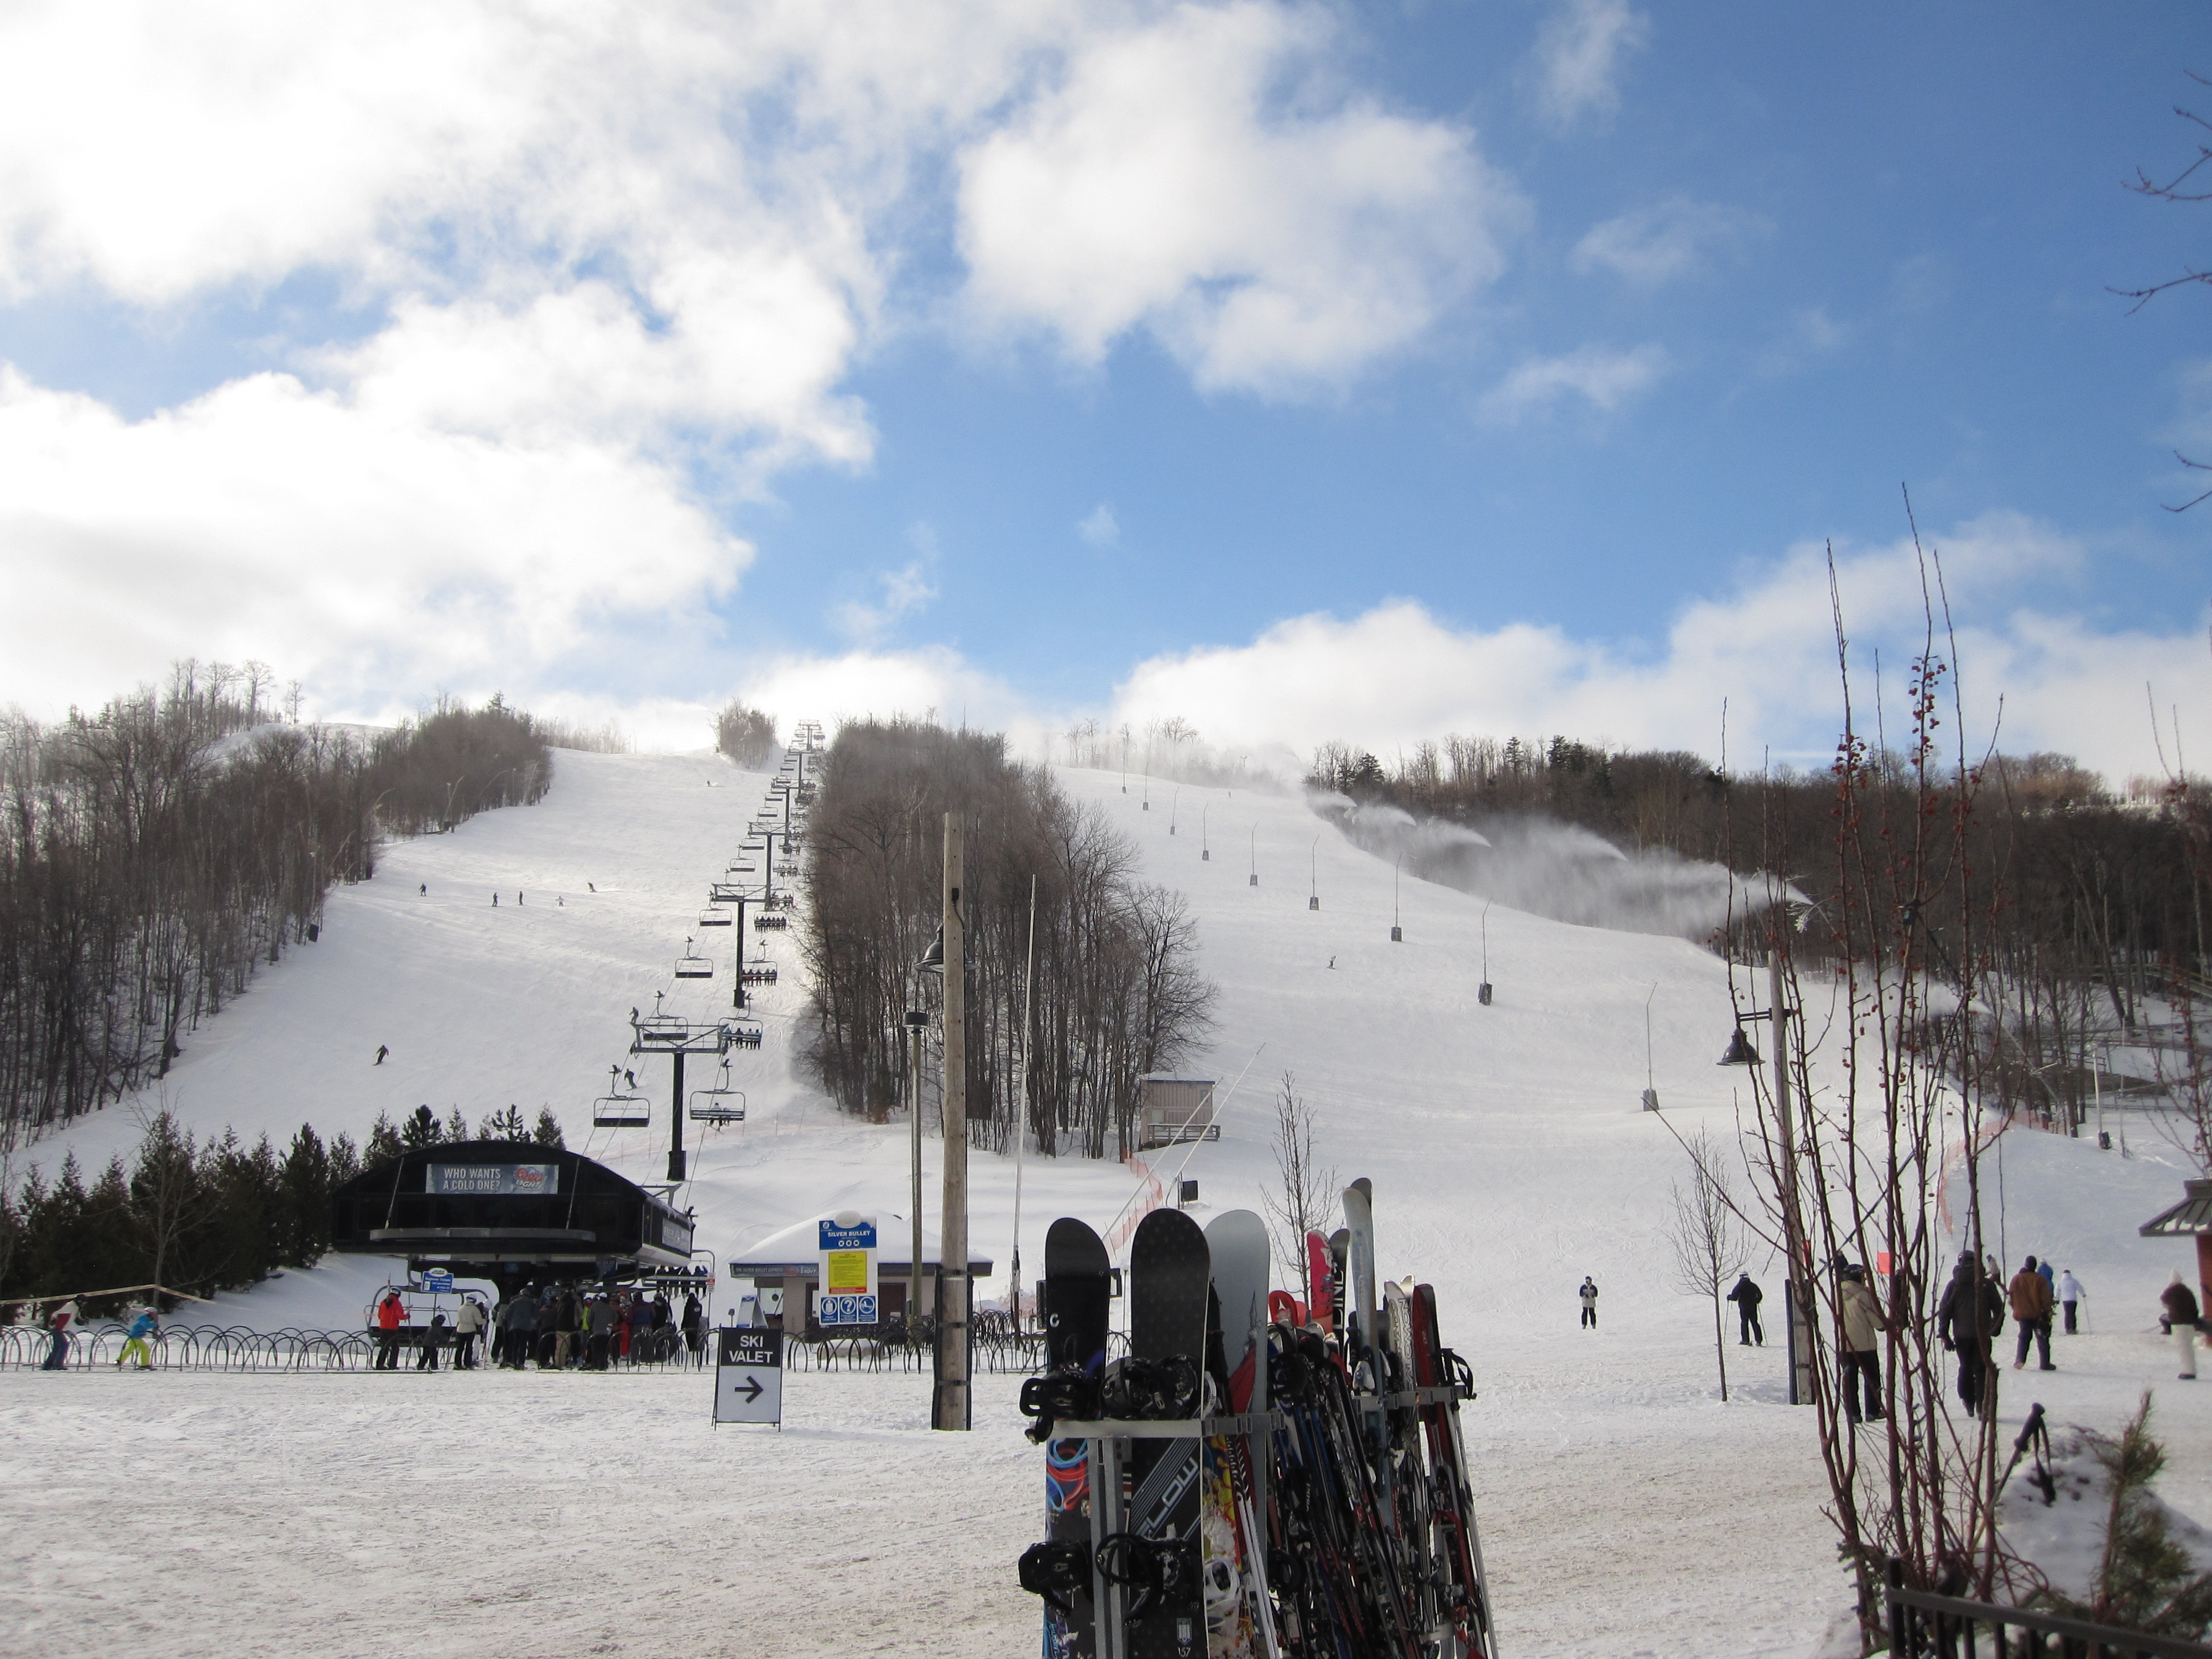 Blue Mountain Silver Bullet Chairlift